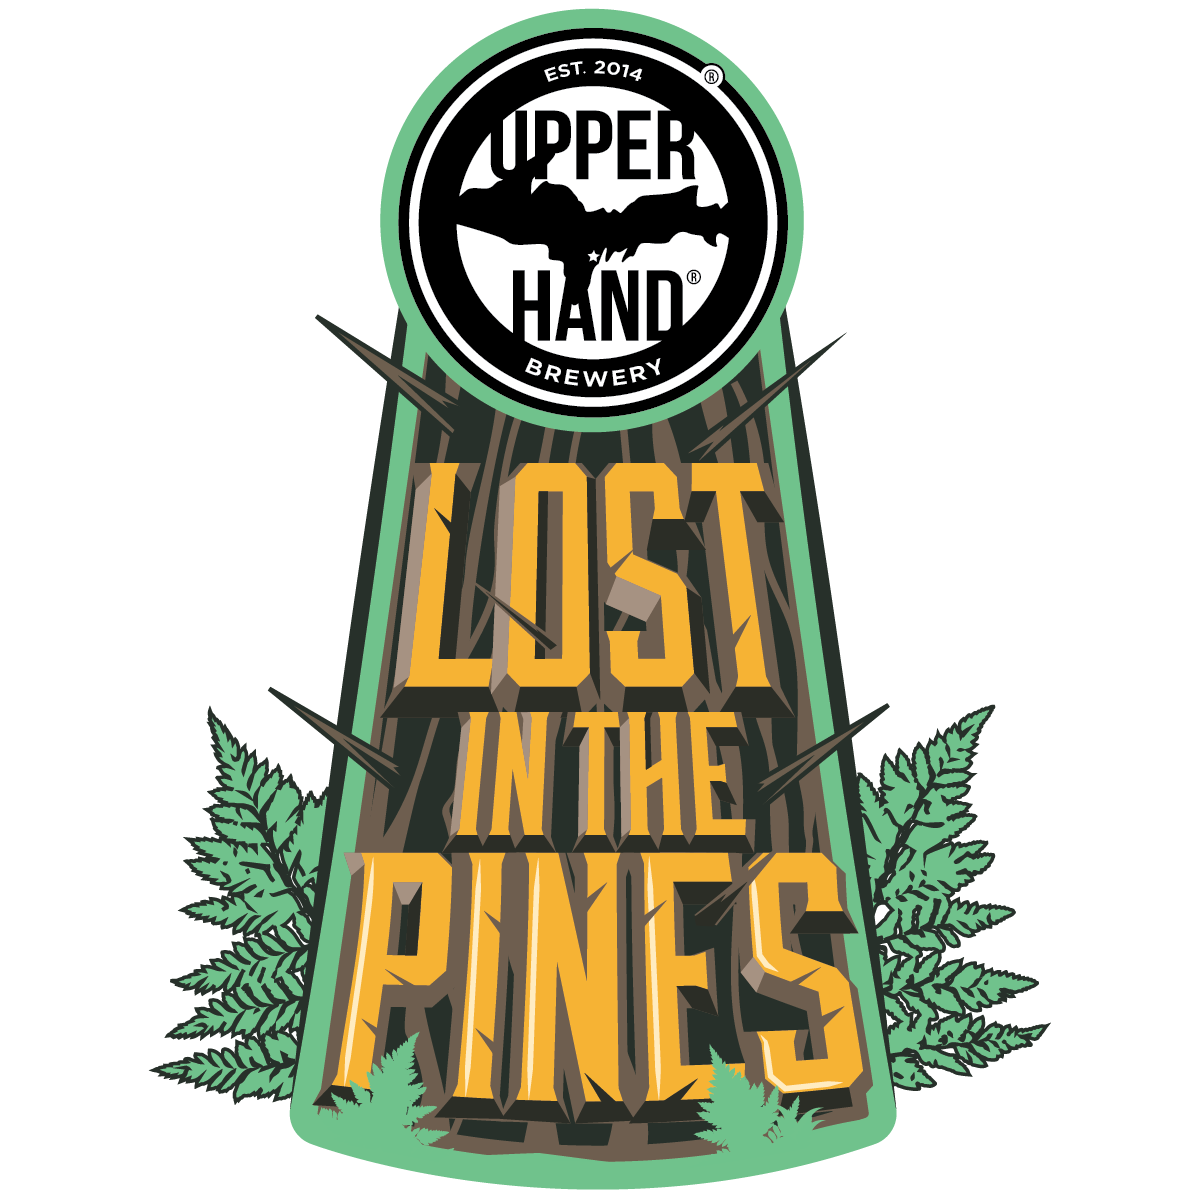 Lost in the Pines